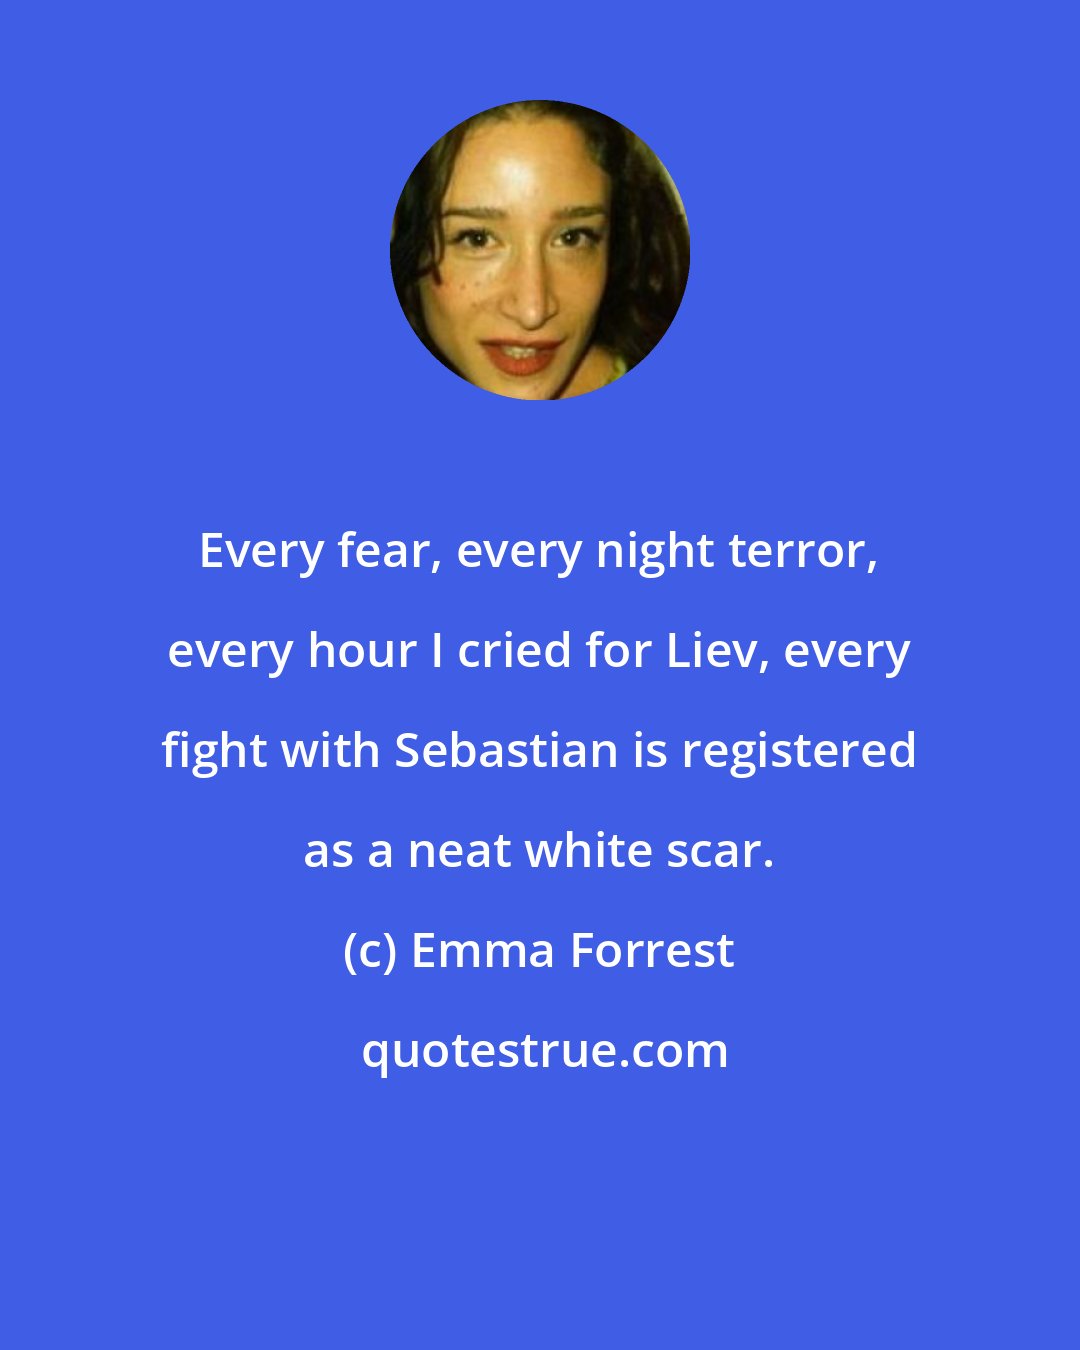 Emma Forrest: Every fear, every night terror, every hour I cried for Liev, every fight with Sebastian is registered as a neat white scar.